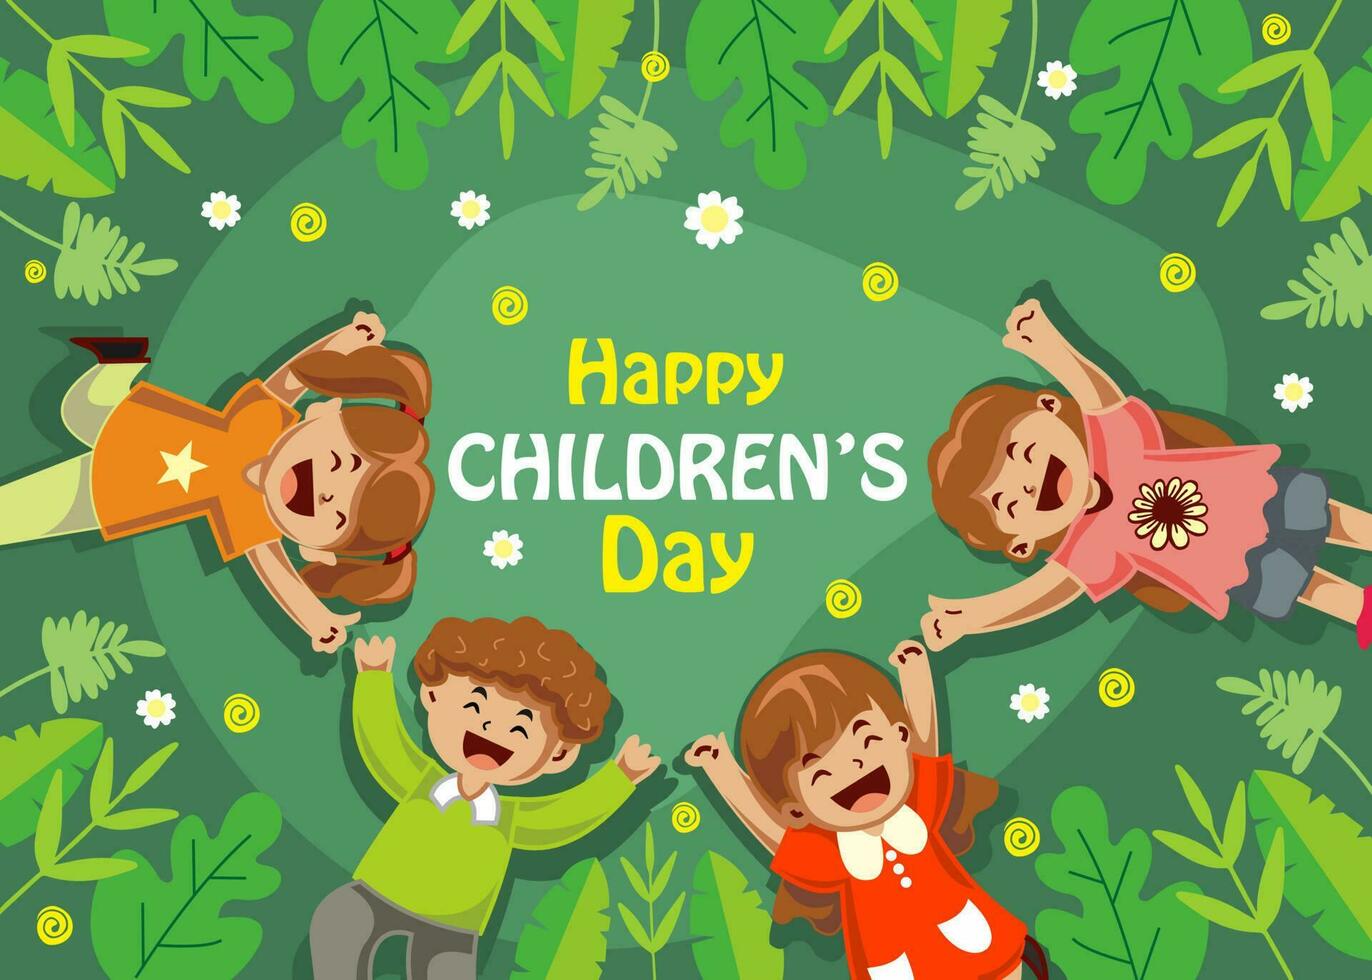 world children's day illustration, children's day banner, child character, cartoon 2 girls and one boy sleeping in a garden full of flowers and green leaves, cartoon background vector